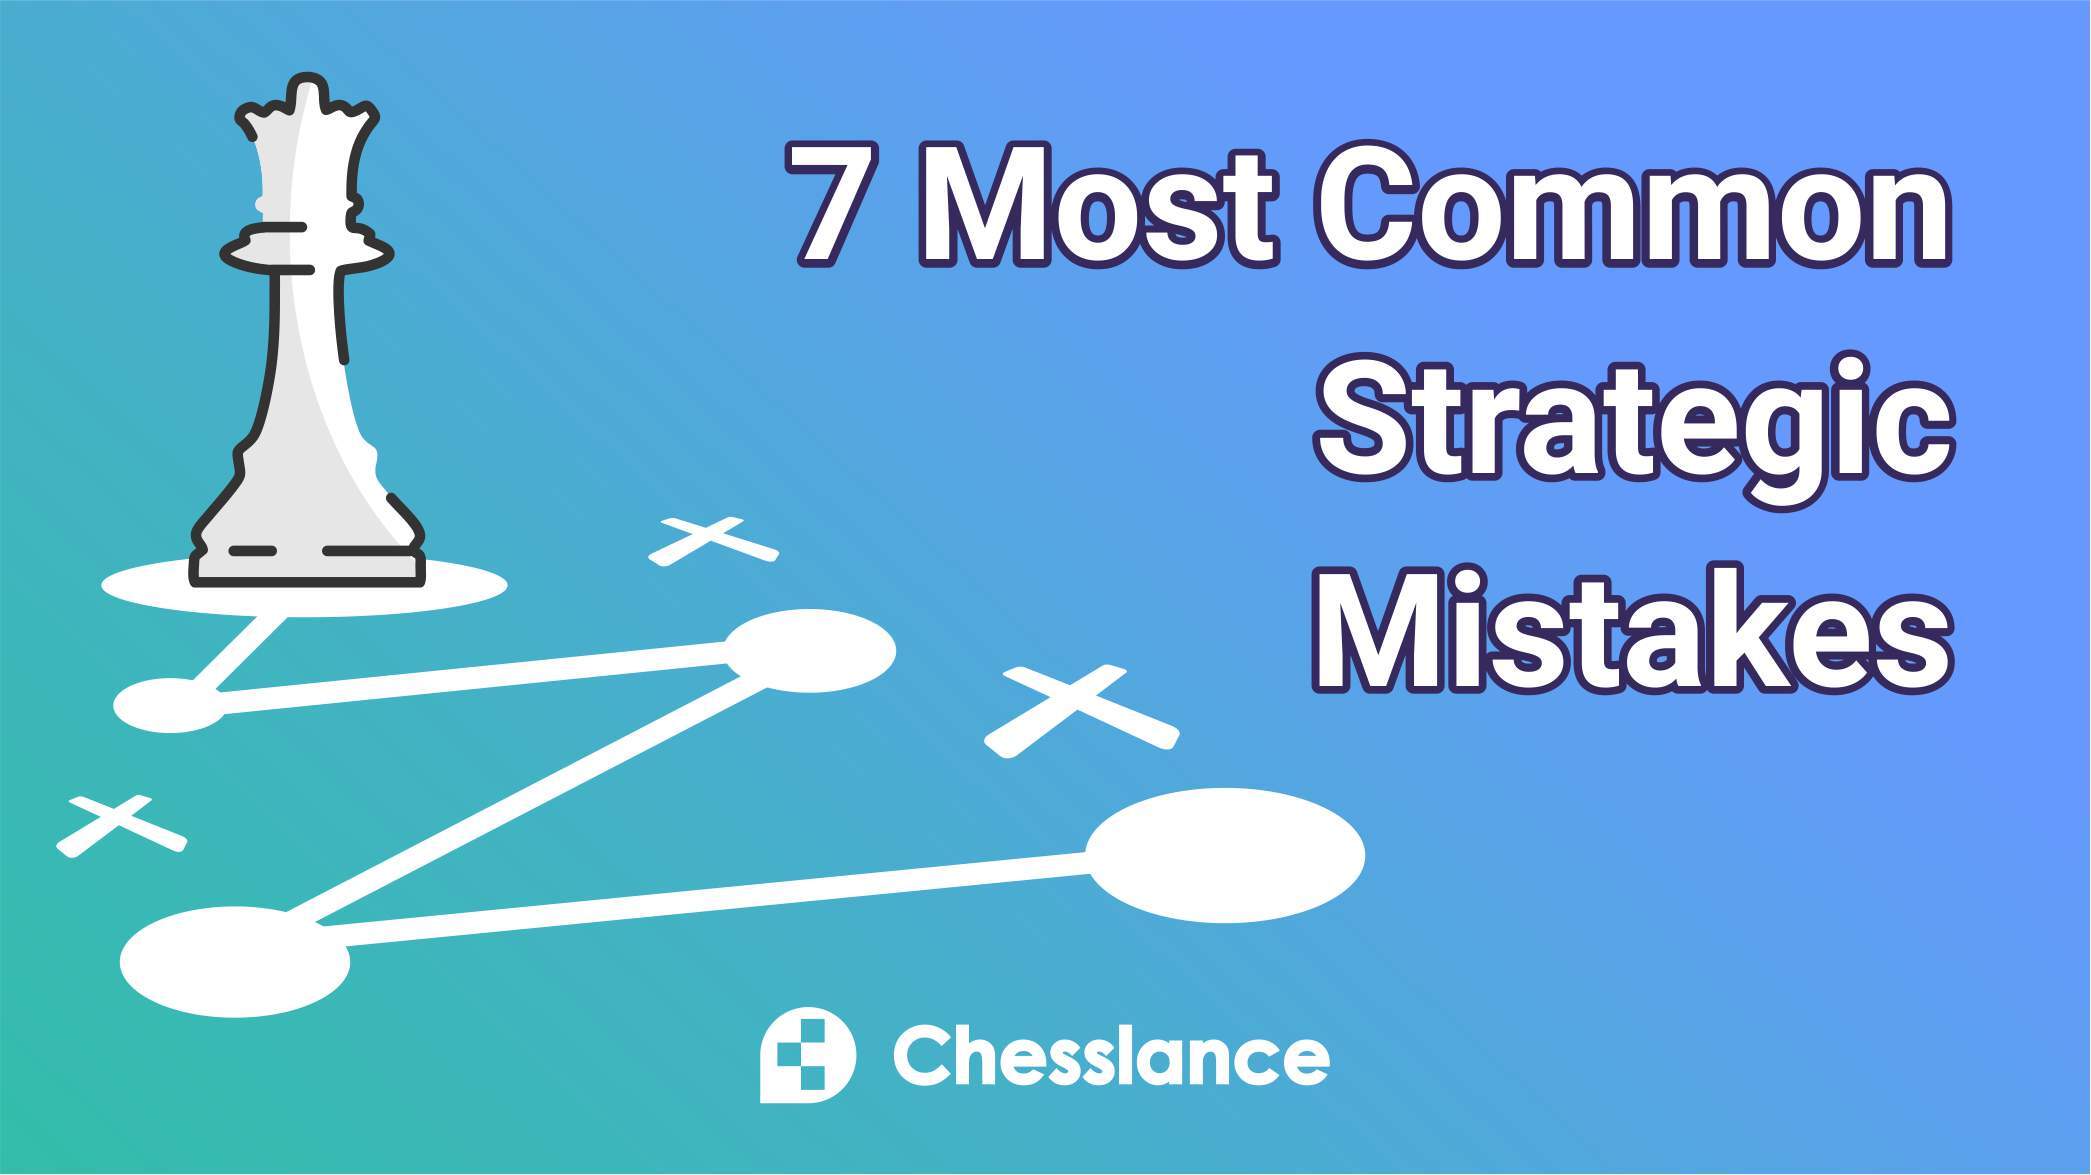 7 Most Common Strategic Mistakes